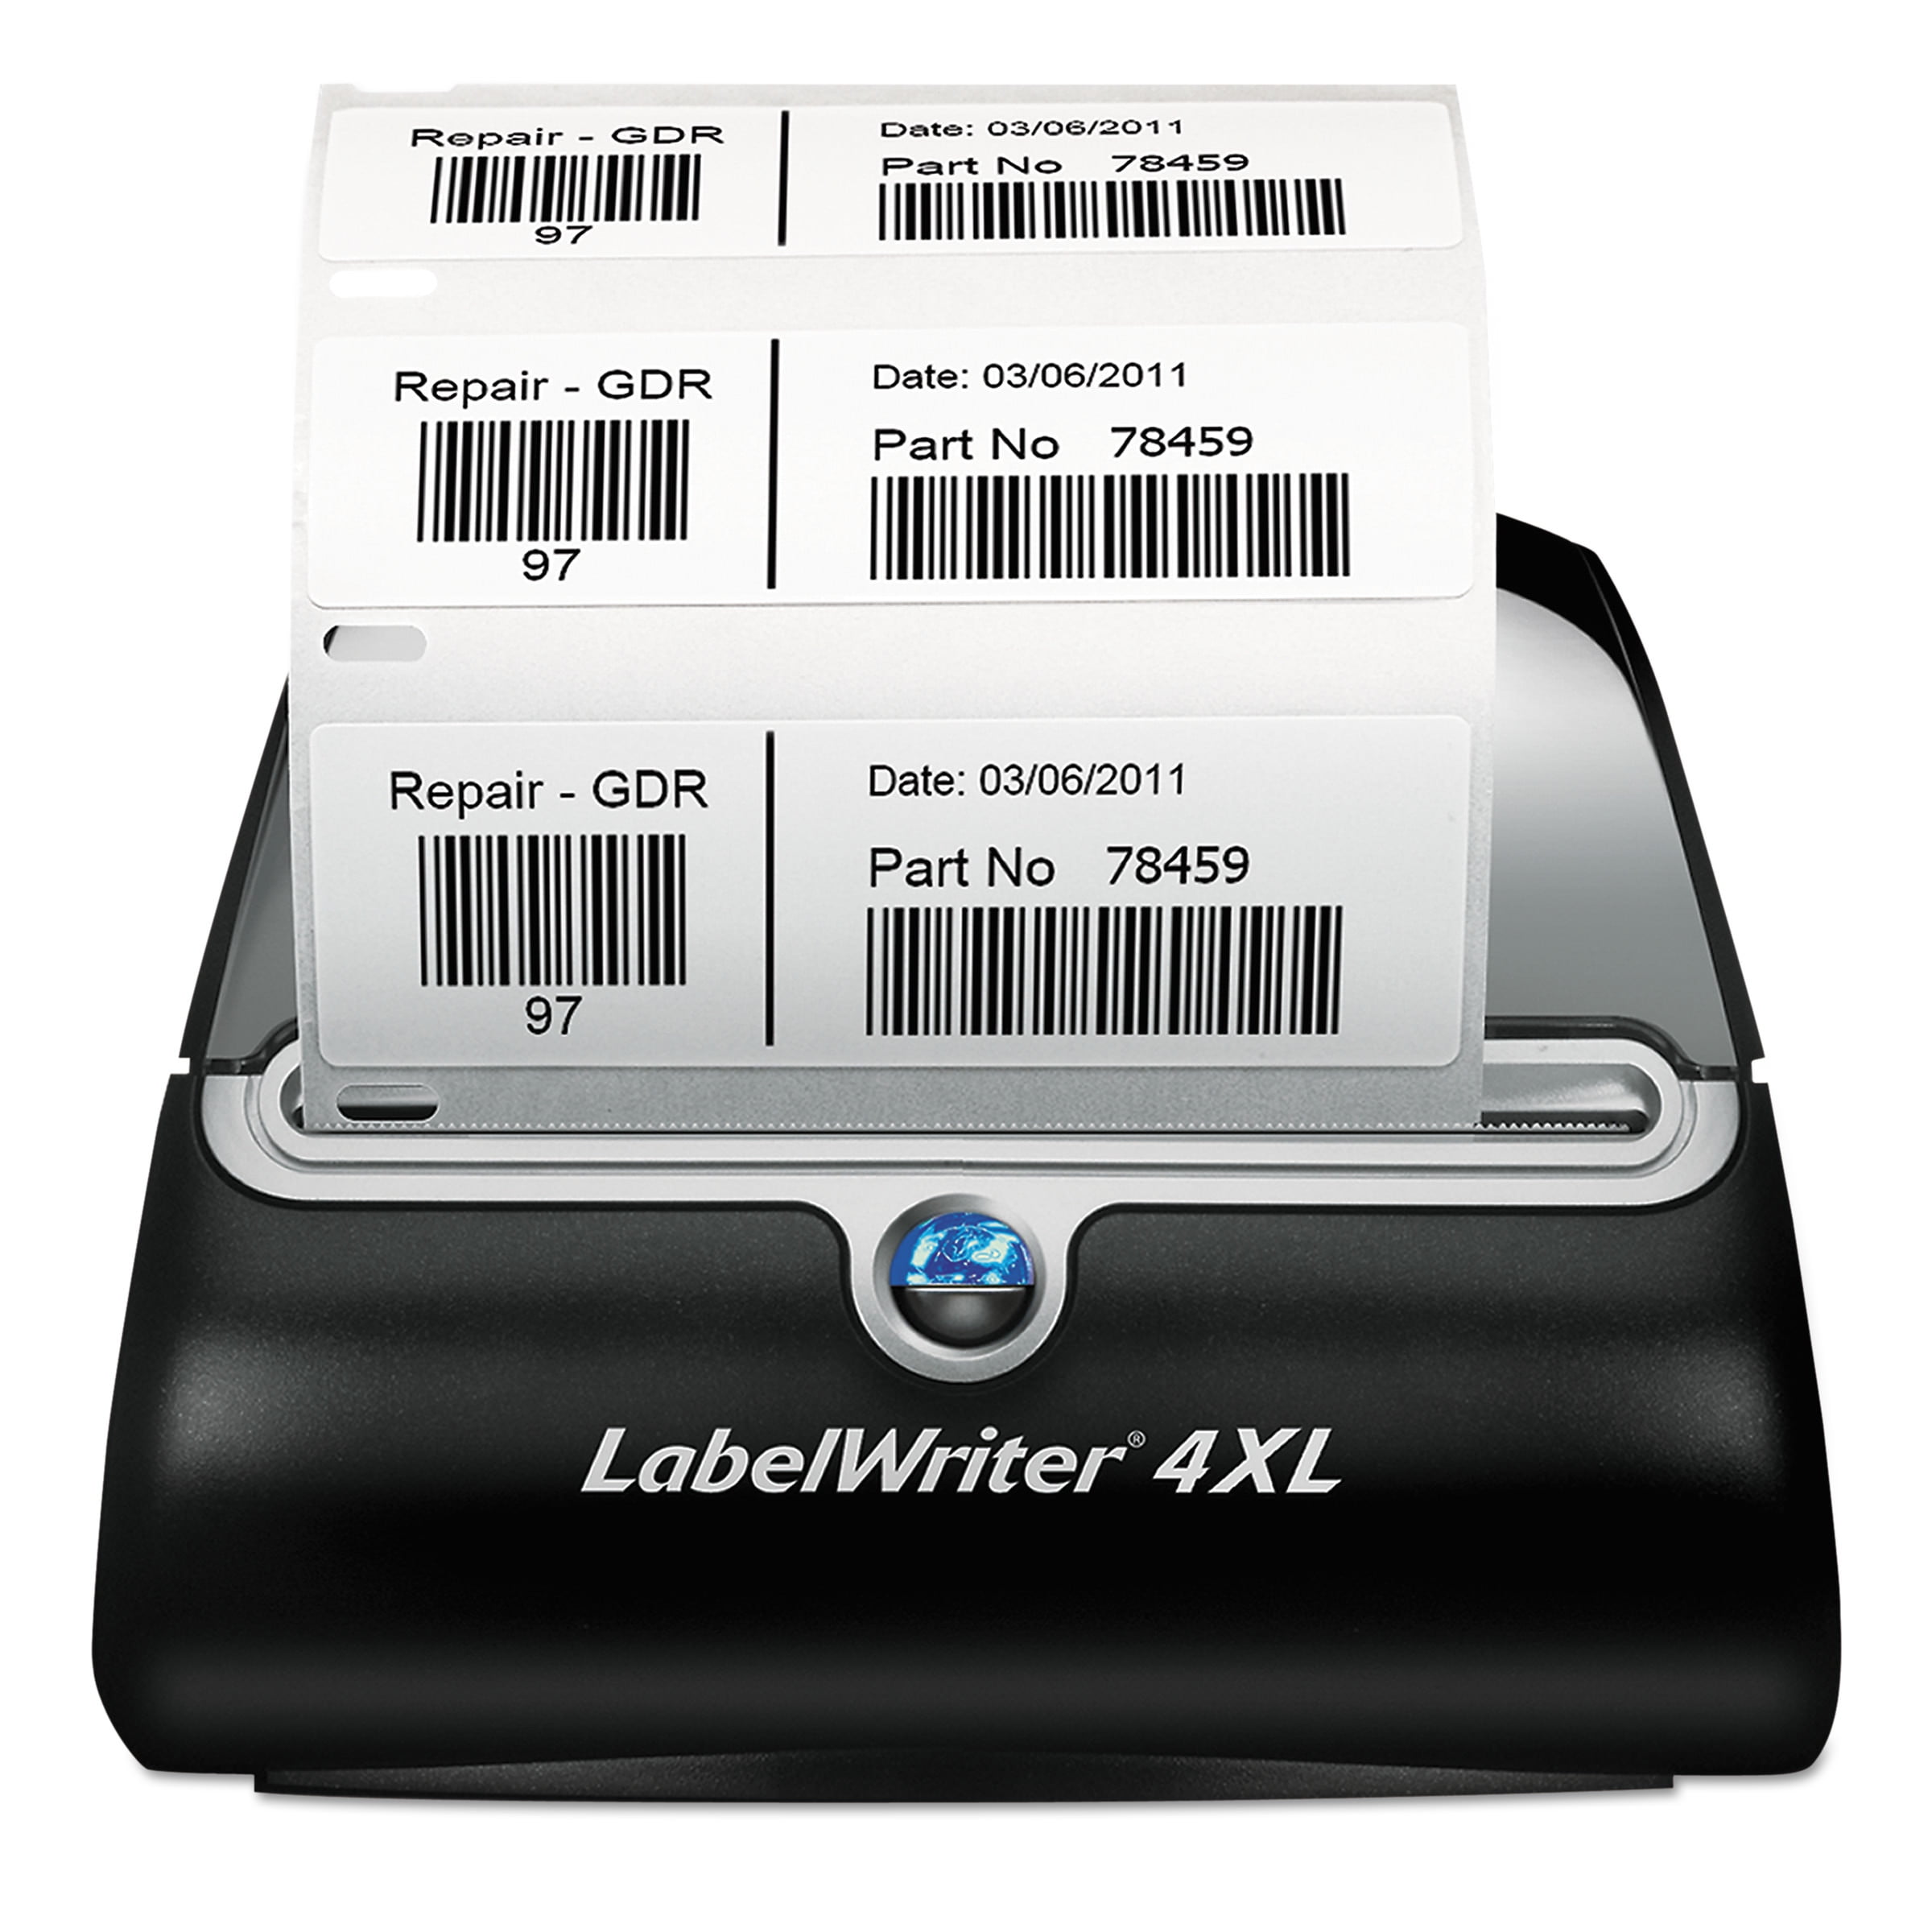 Dymo Labelwriter 450 Label Printer Monochrome Direct Thermal Roll 5.9 Cm Up To 51 Labels/Min Usb Product Category: Peripherals/Label Printers/Makers Sanford